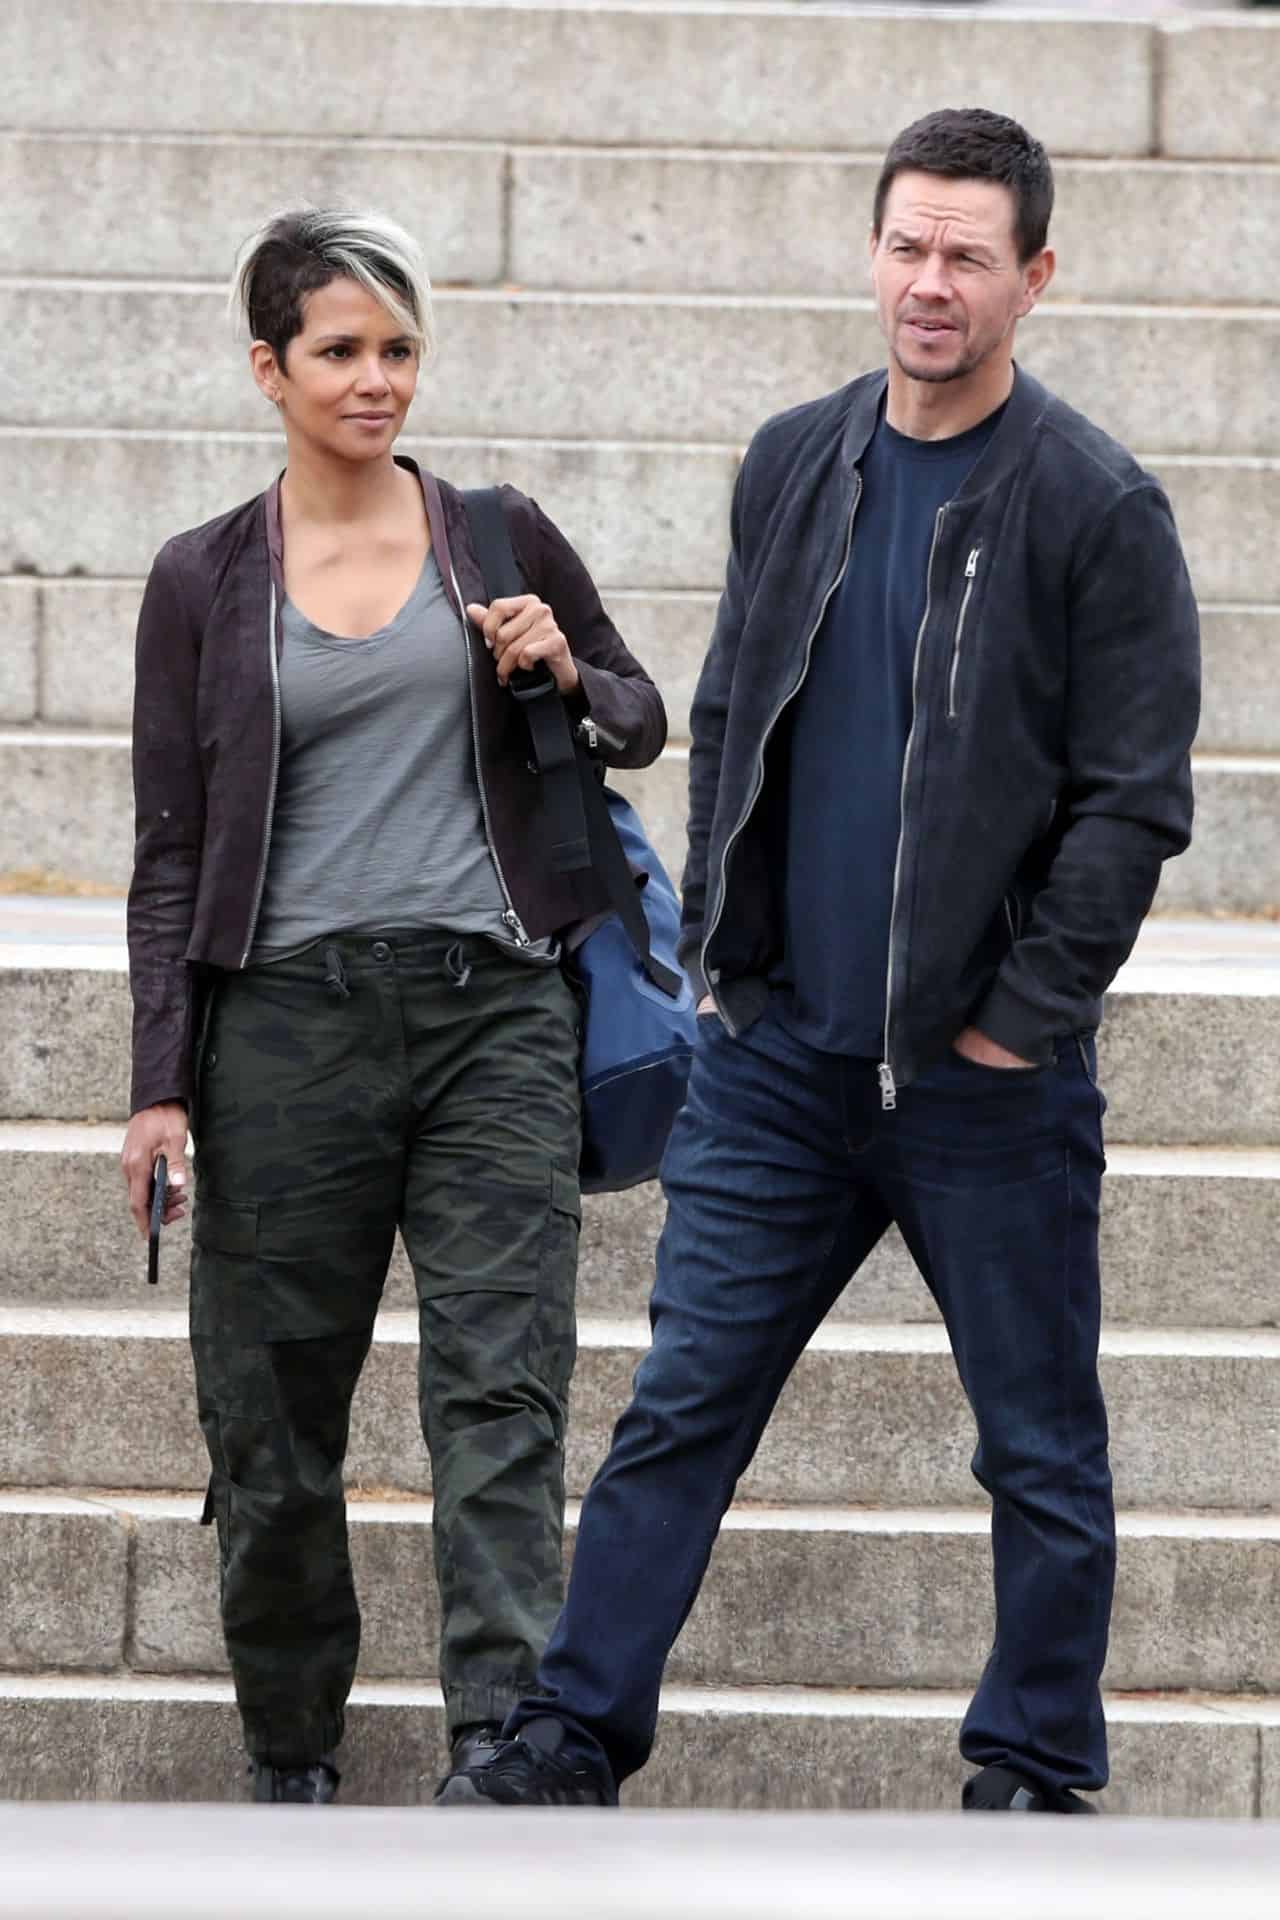 Halle Berry Looks Great on the Set of Her New Movie "Our Man from Jersey"